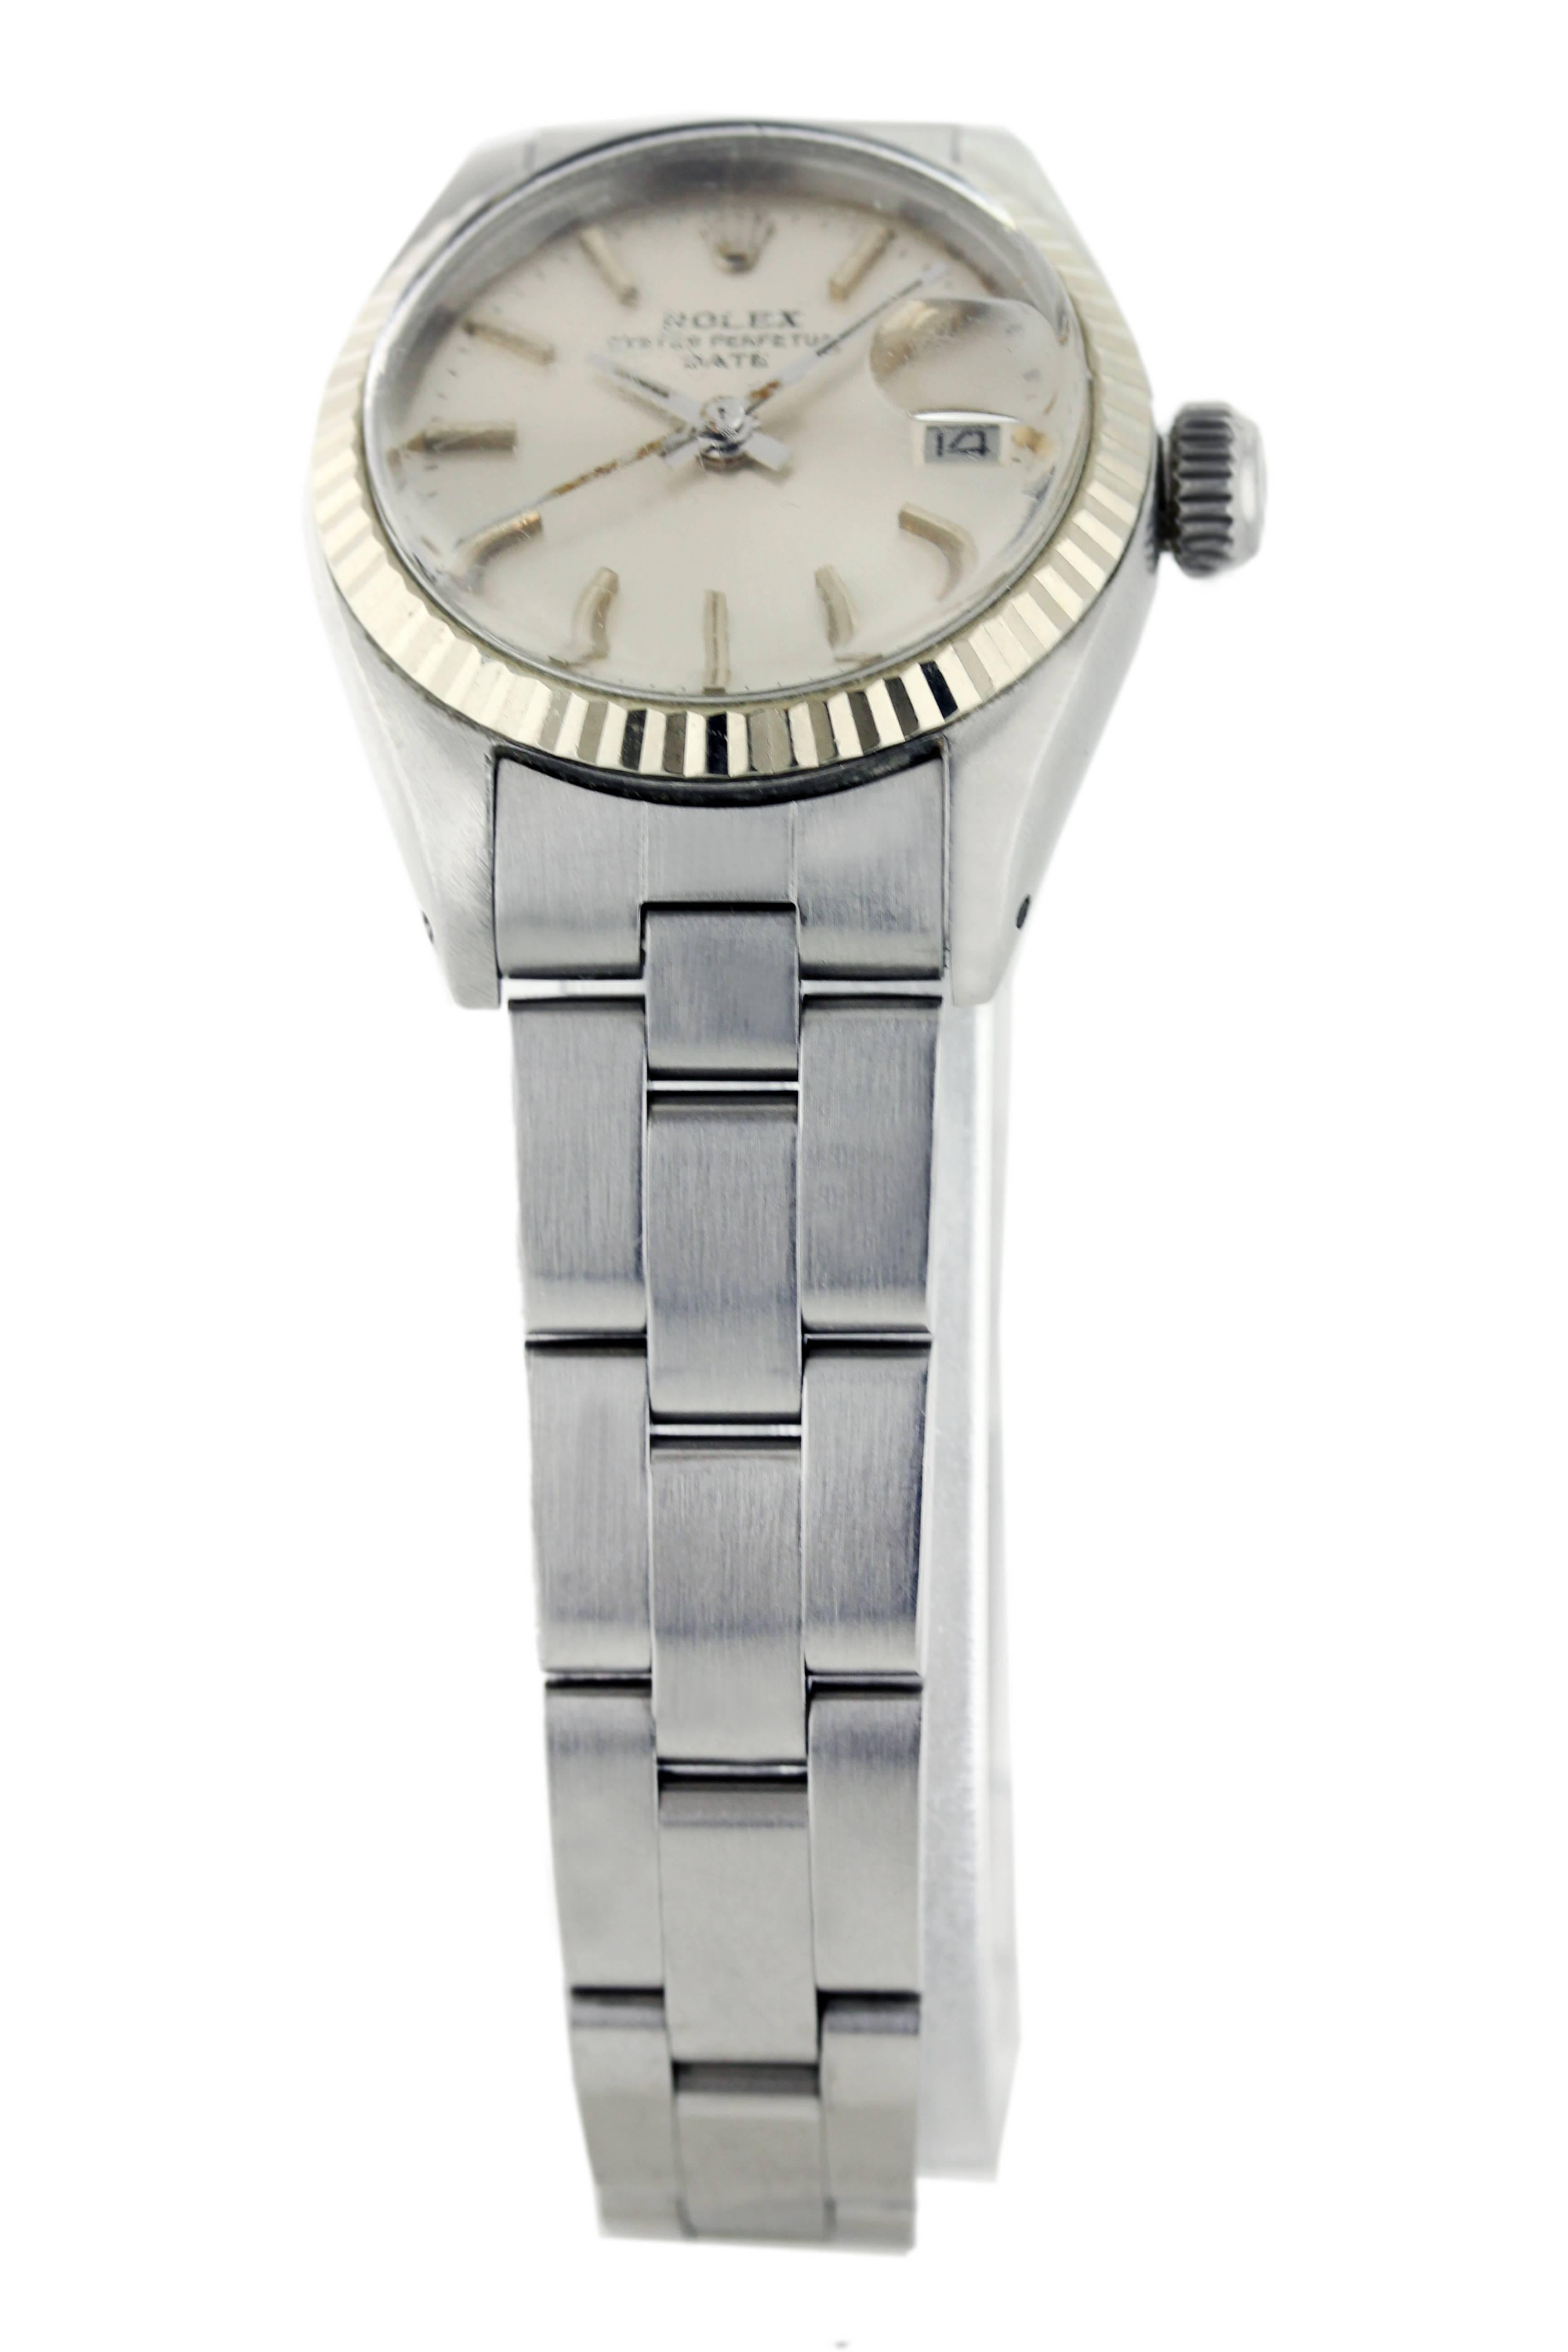 Rolex Lady's Stainless Steel Datejust Automatic Wristwatch Ref 691 For Sale 1